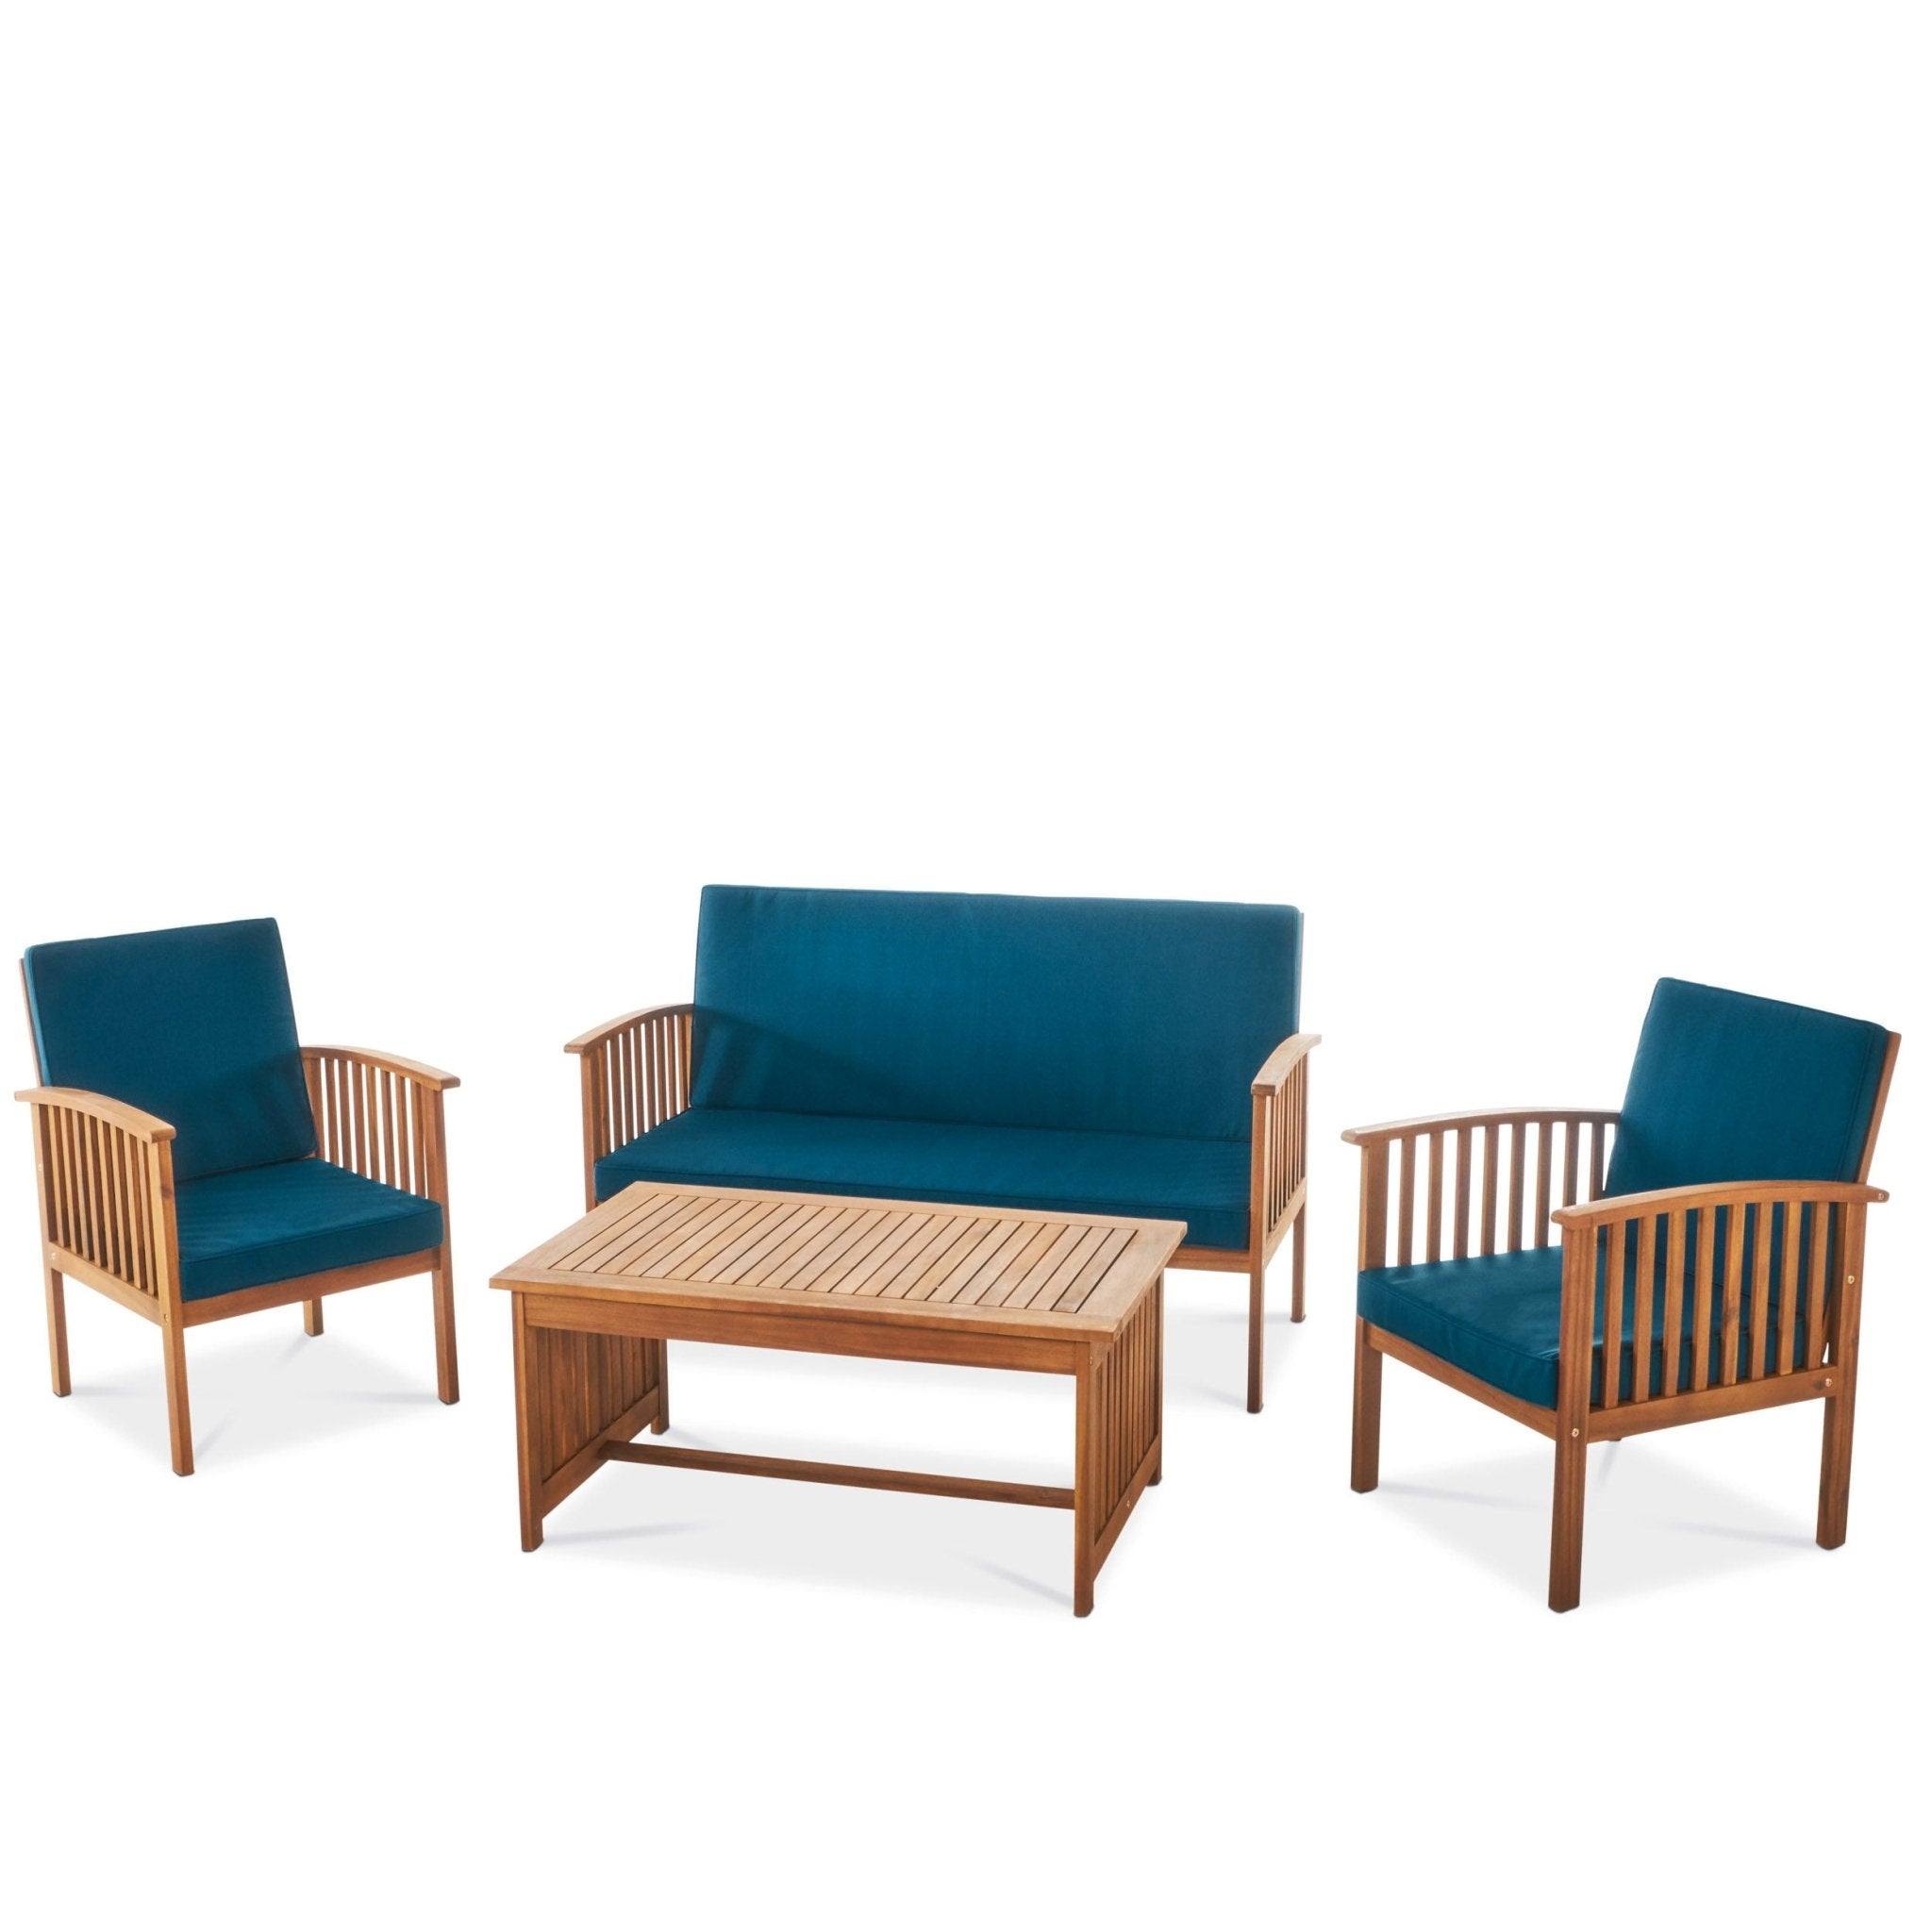 Prism 4-Piece Patio Sofa Set with Coffee Table, 2 Chairs and Loveseat, Teal Blue